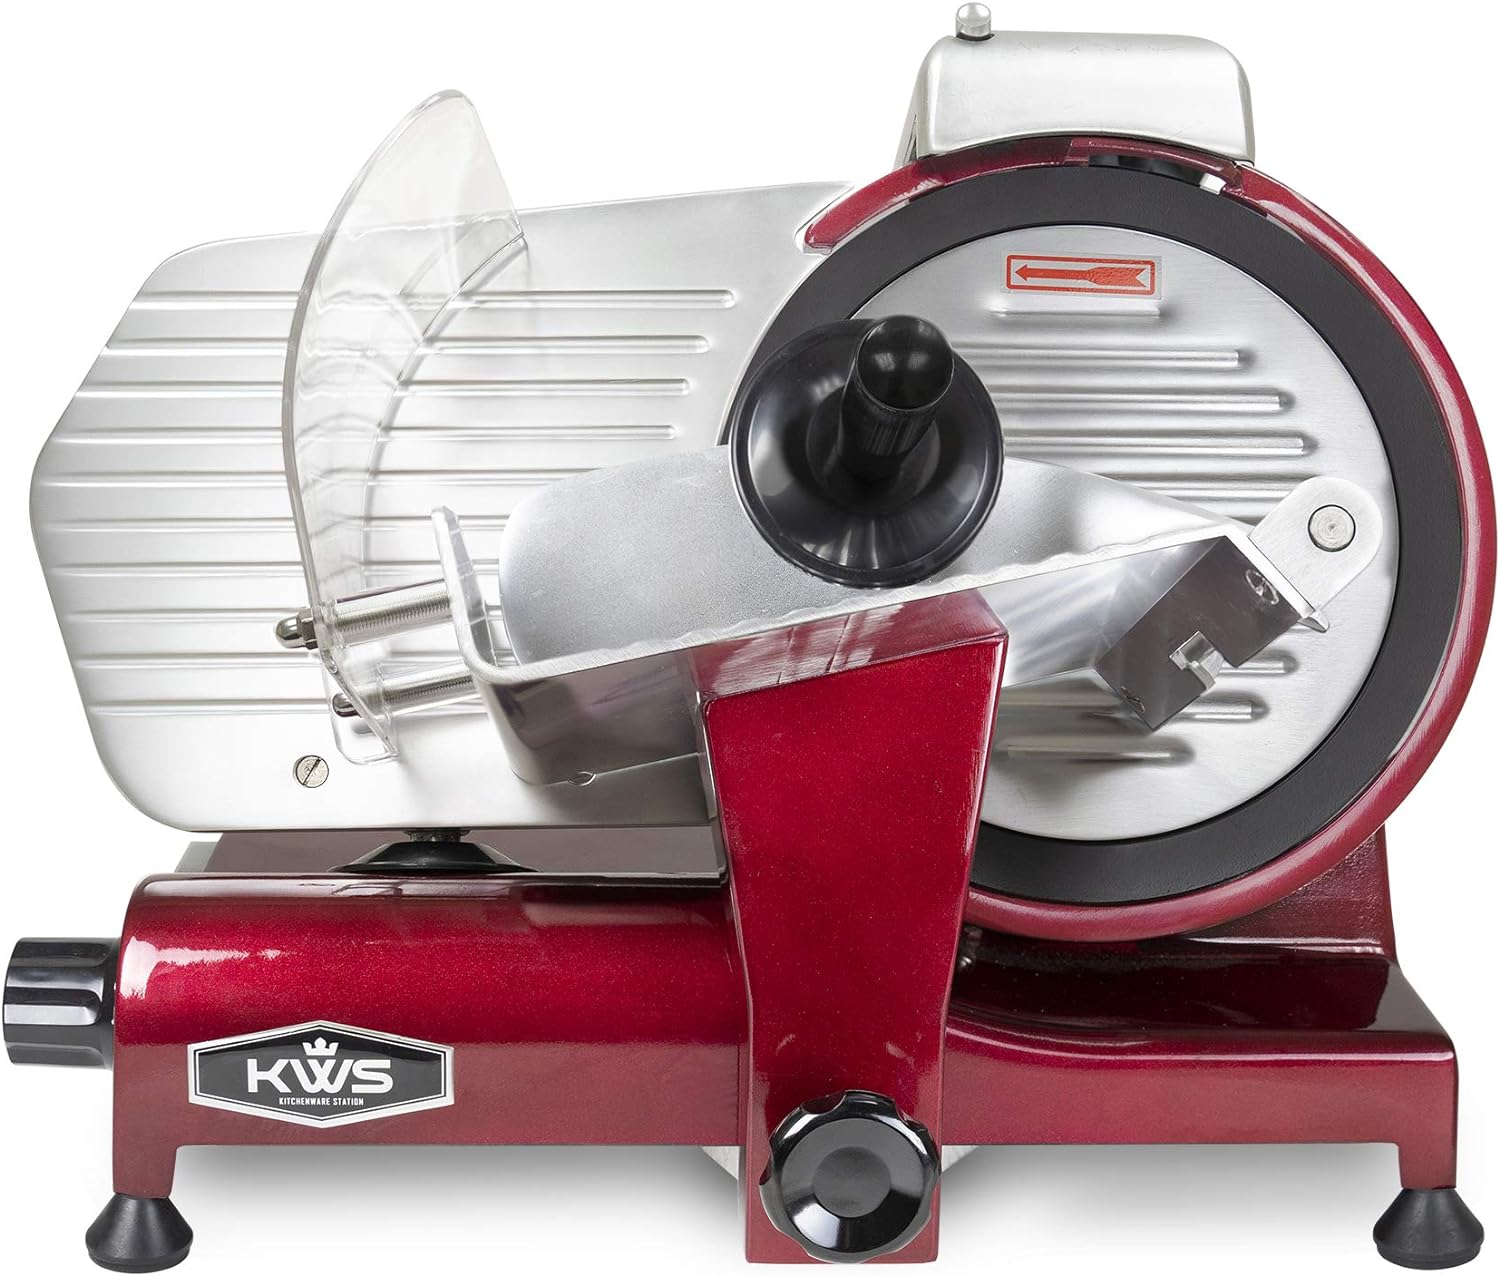 KWS KitchenWare Station KWS MS-10XT Premium Commercial 320W Electric Meat Slicer 10-Inch in Red with Non-sticky Teflon Blade